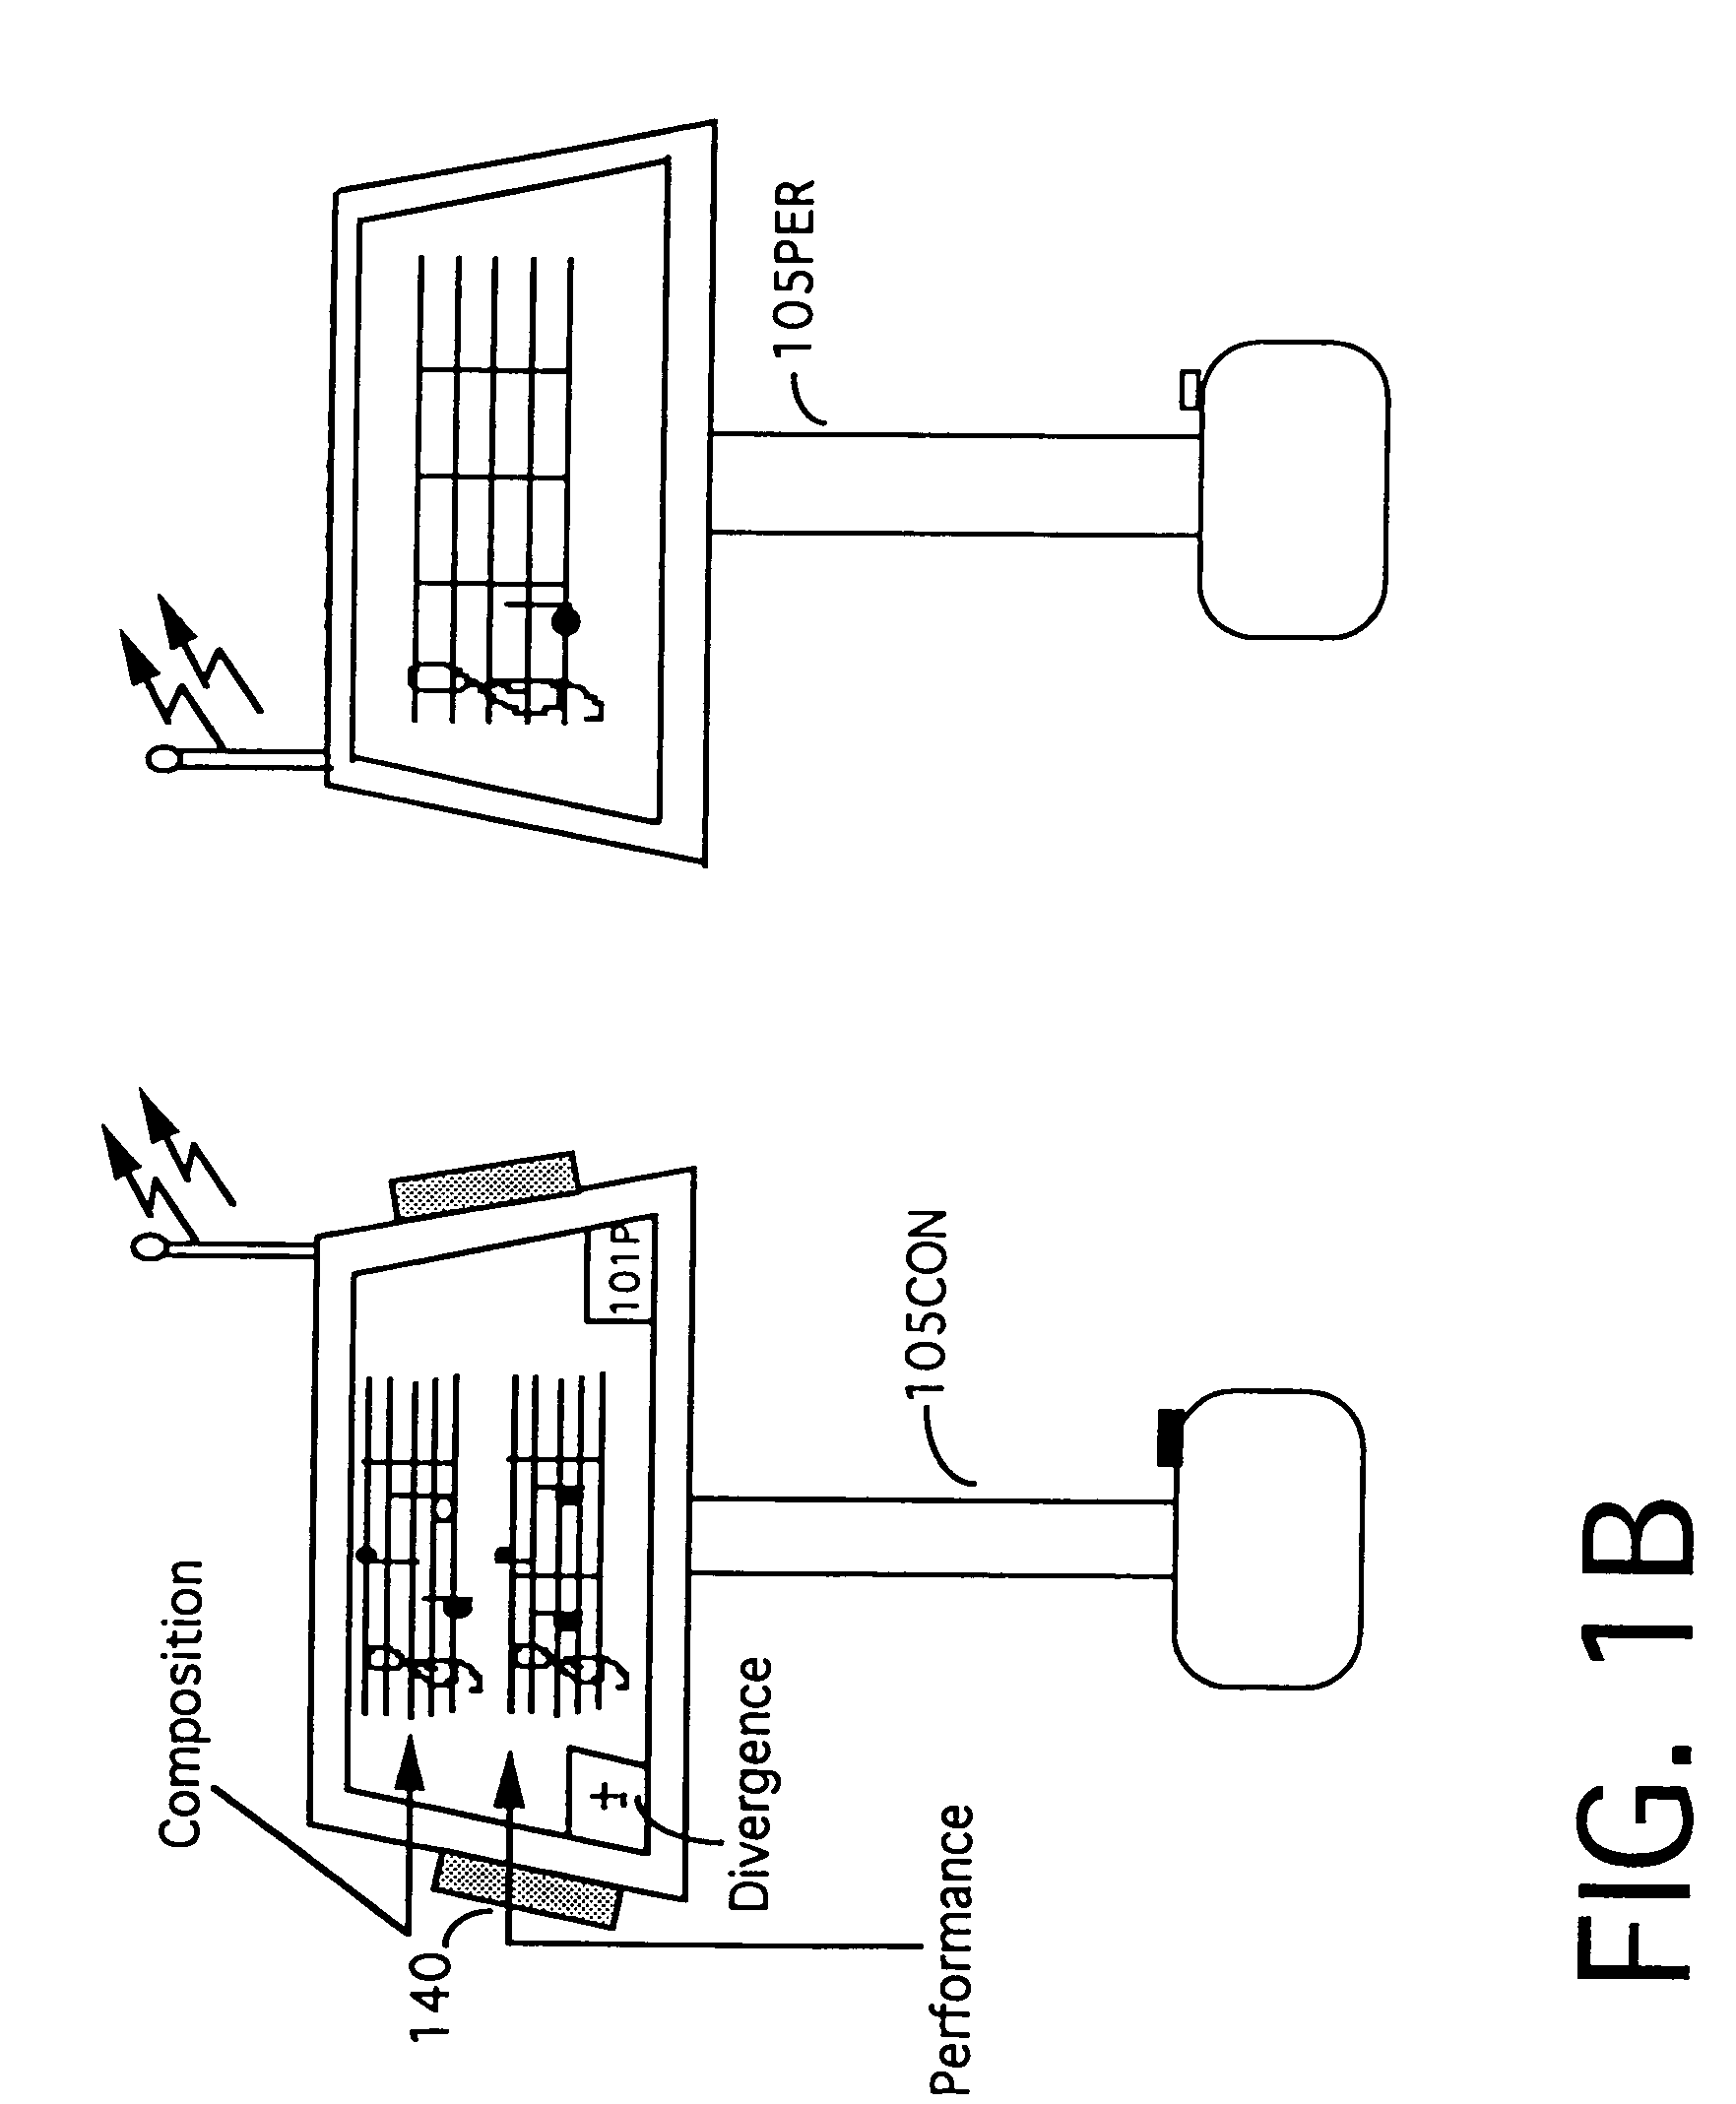 Multi-dimensional transformation systems and display communication architecture for compositions and derivations thereof